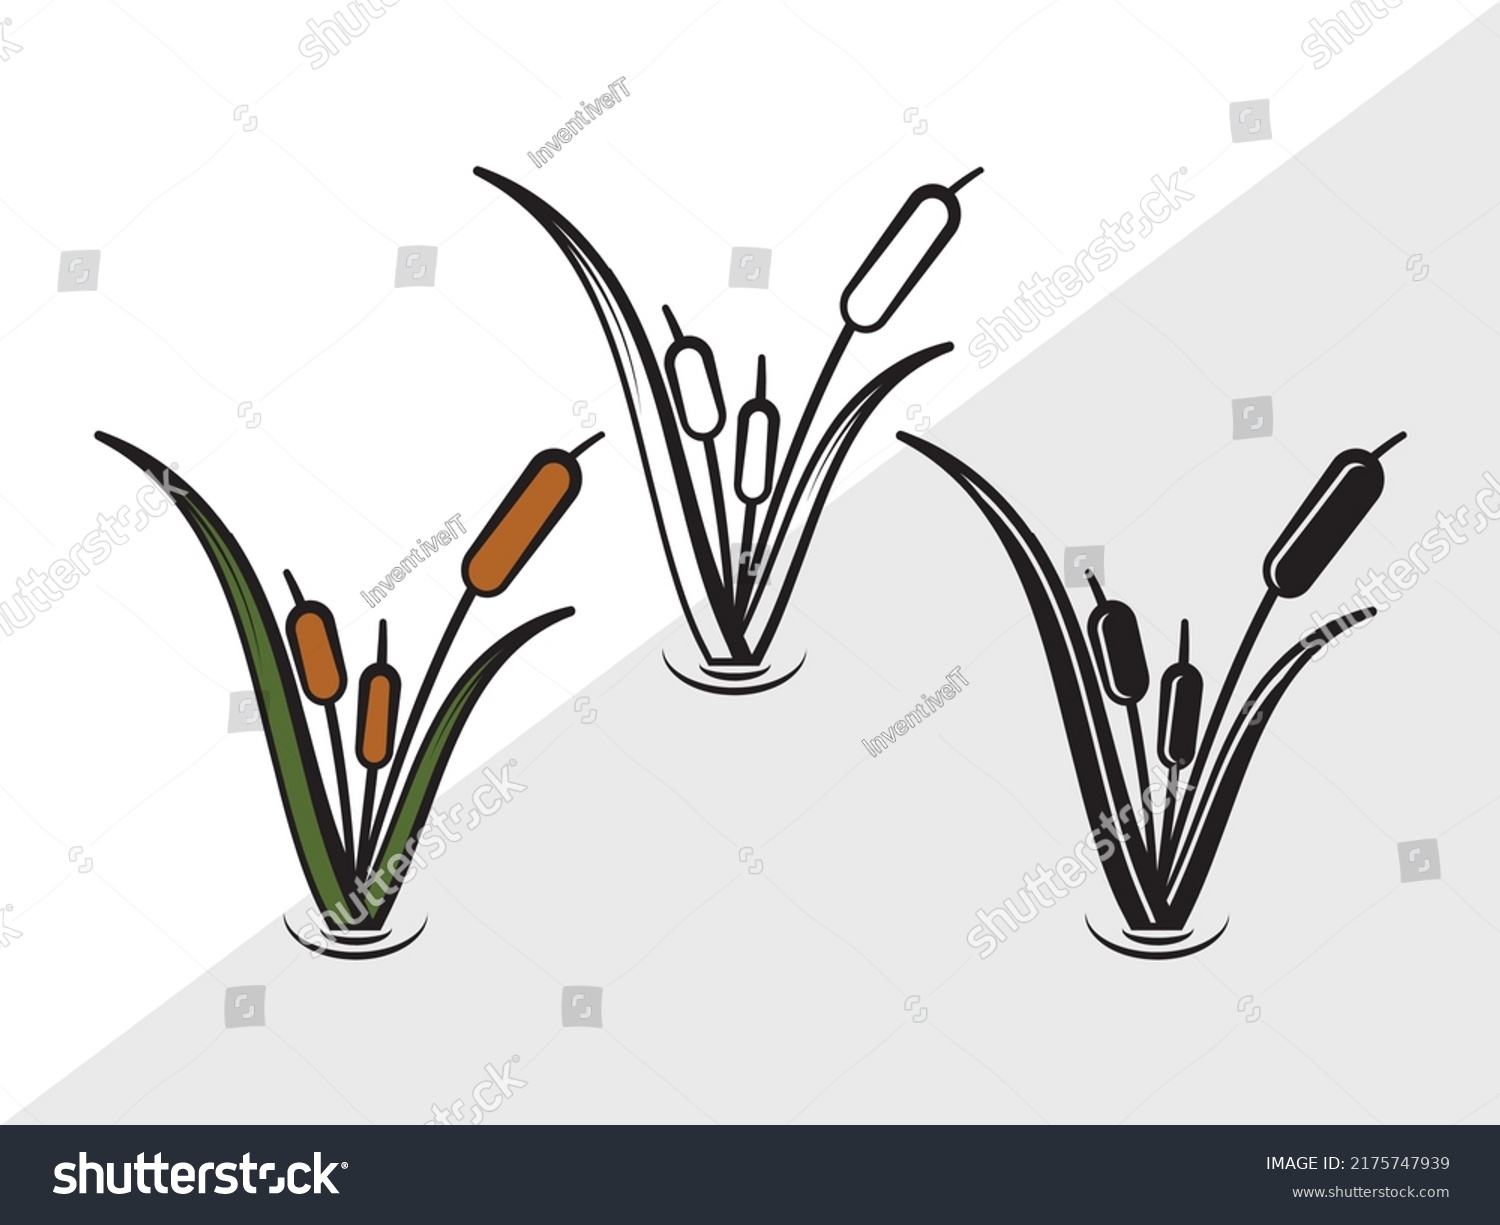 Cattail Svg Printable Vector Illustration Royalty Free Stock Vector 2175747939